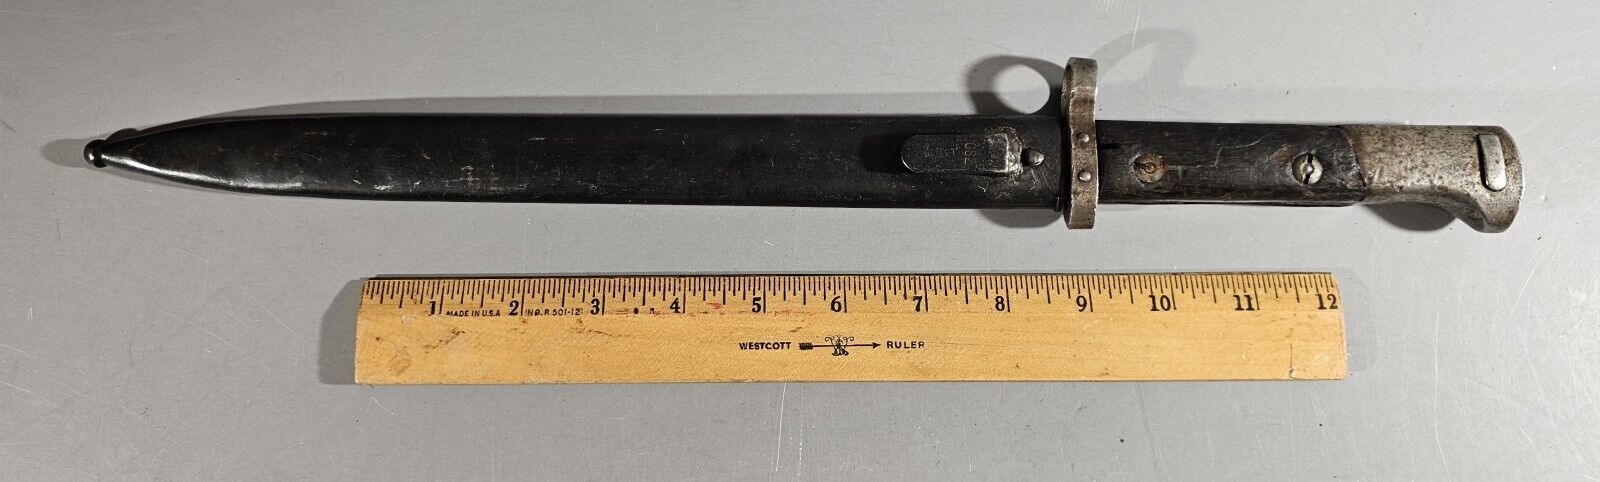 WWI CHILEAN KNIFE BAYONET & SCABBARD FOR M1912 MAUSER, M1935 CARBINE